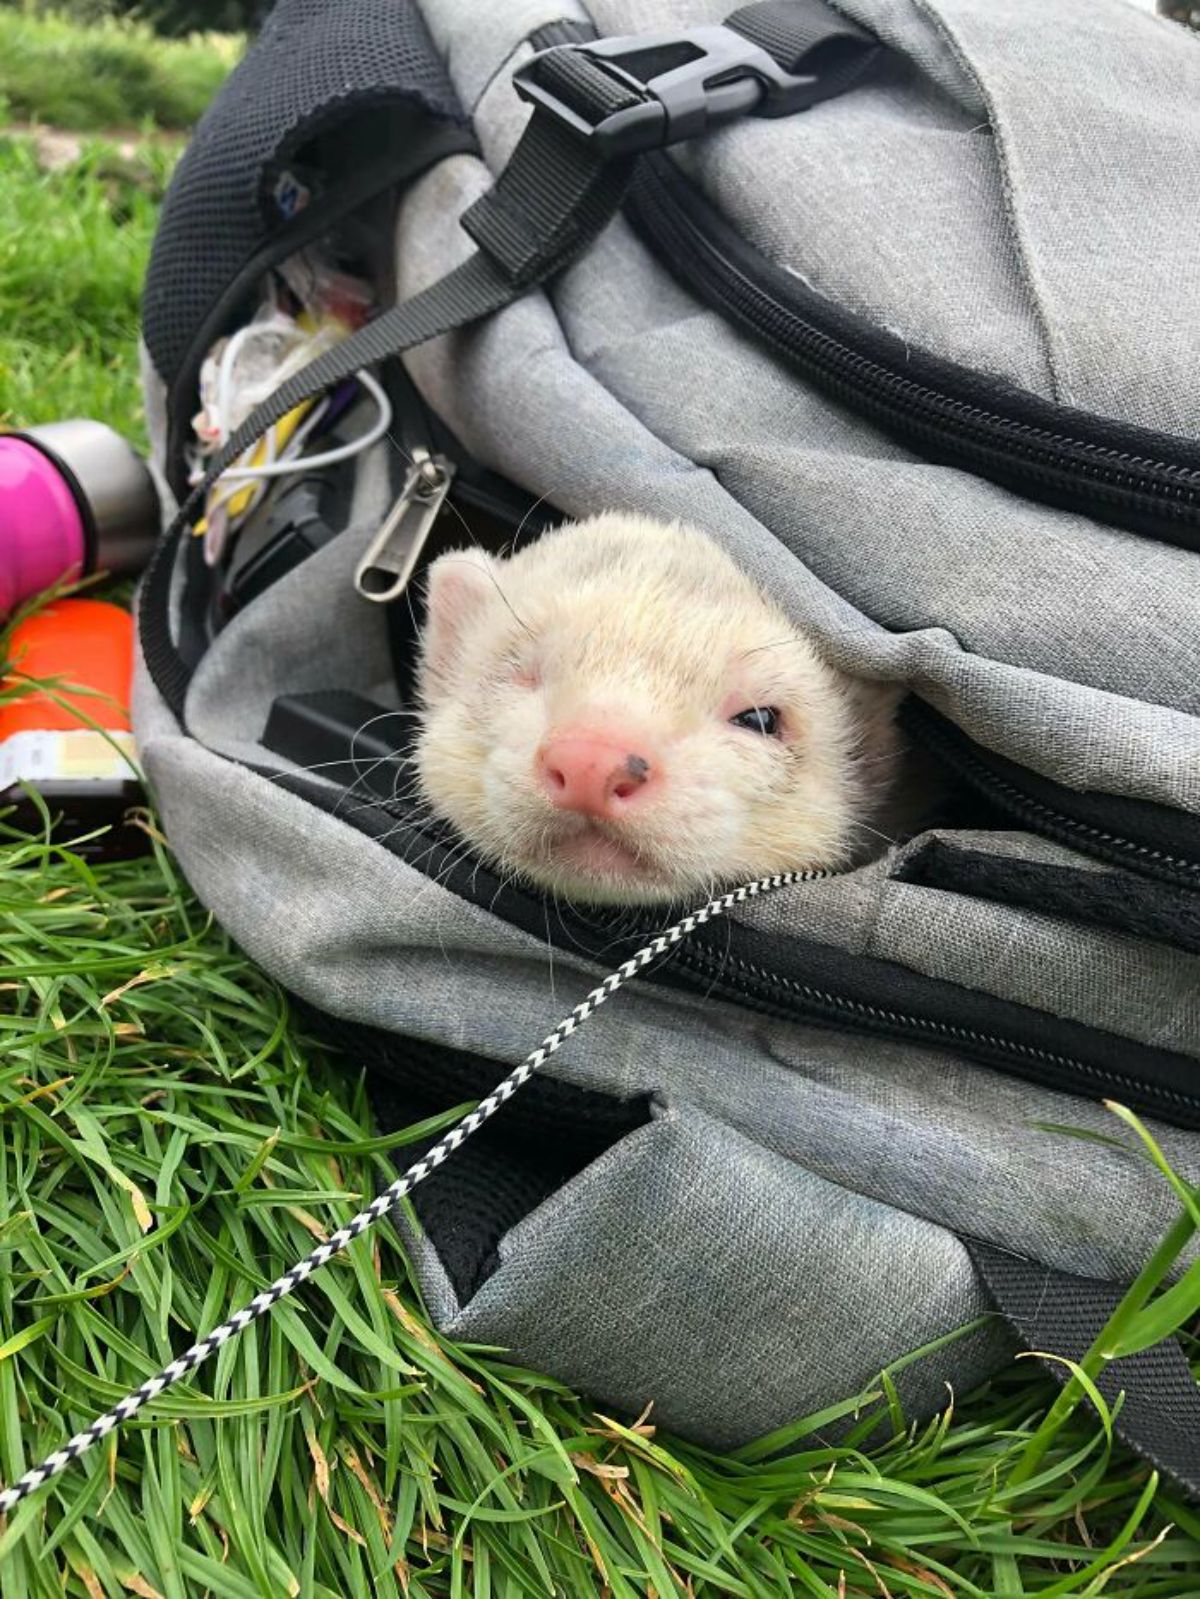 one-eyed white ferret poking its head out of a grey and black backpack on the grass